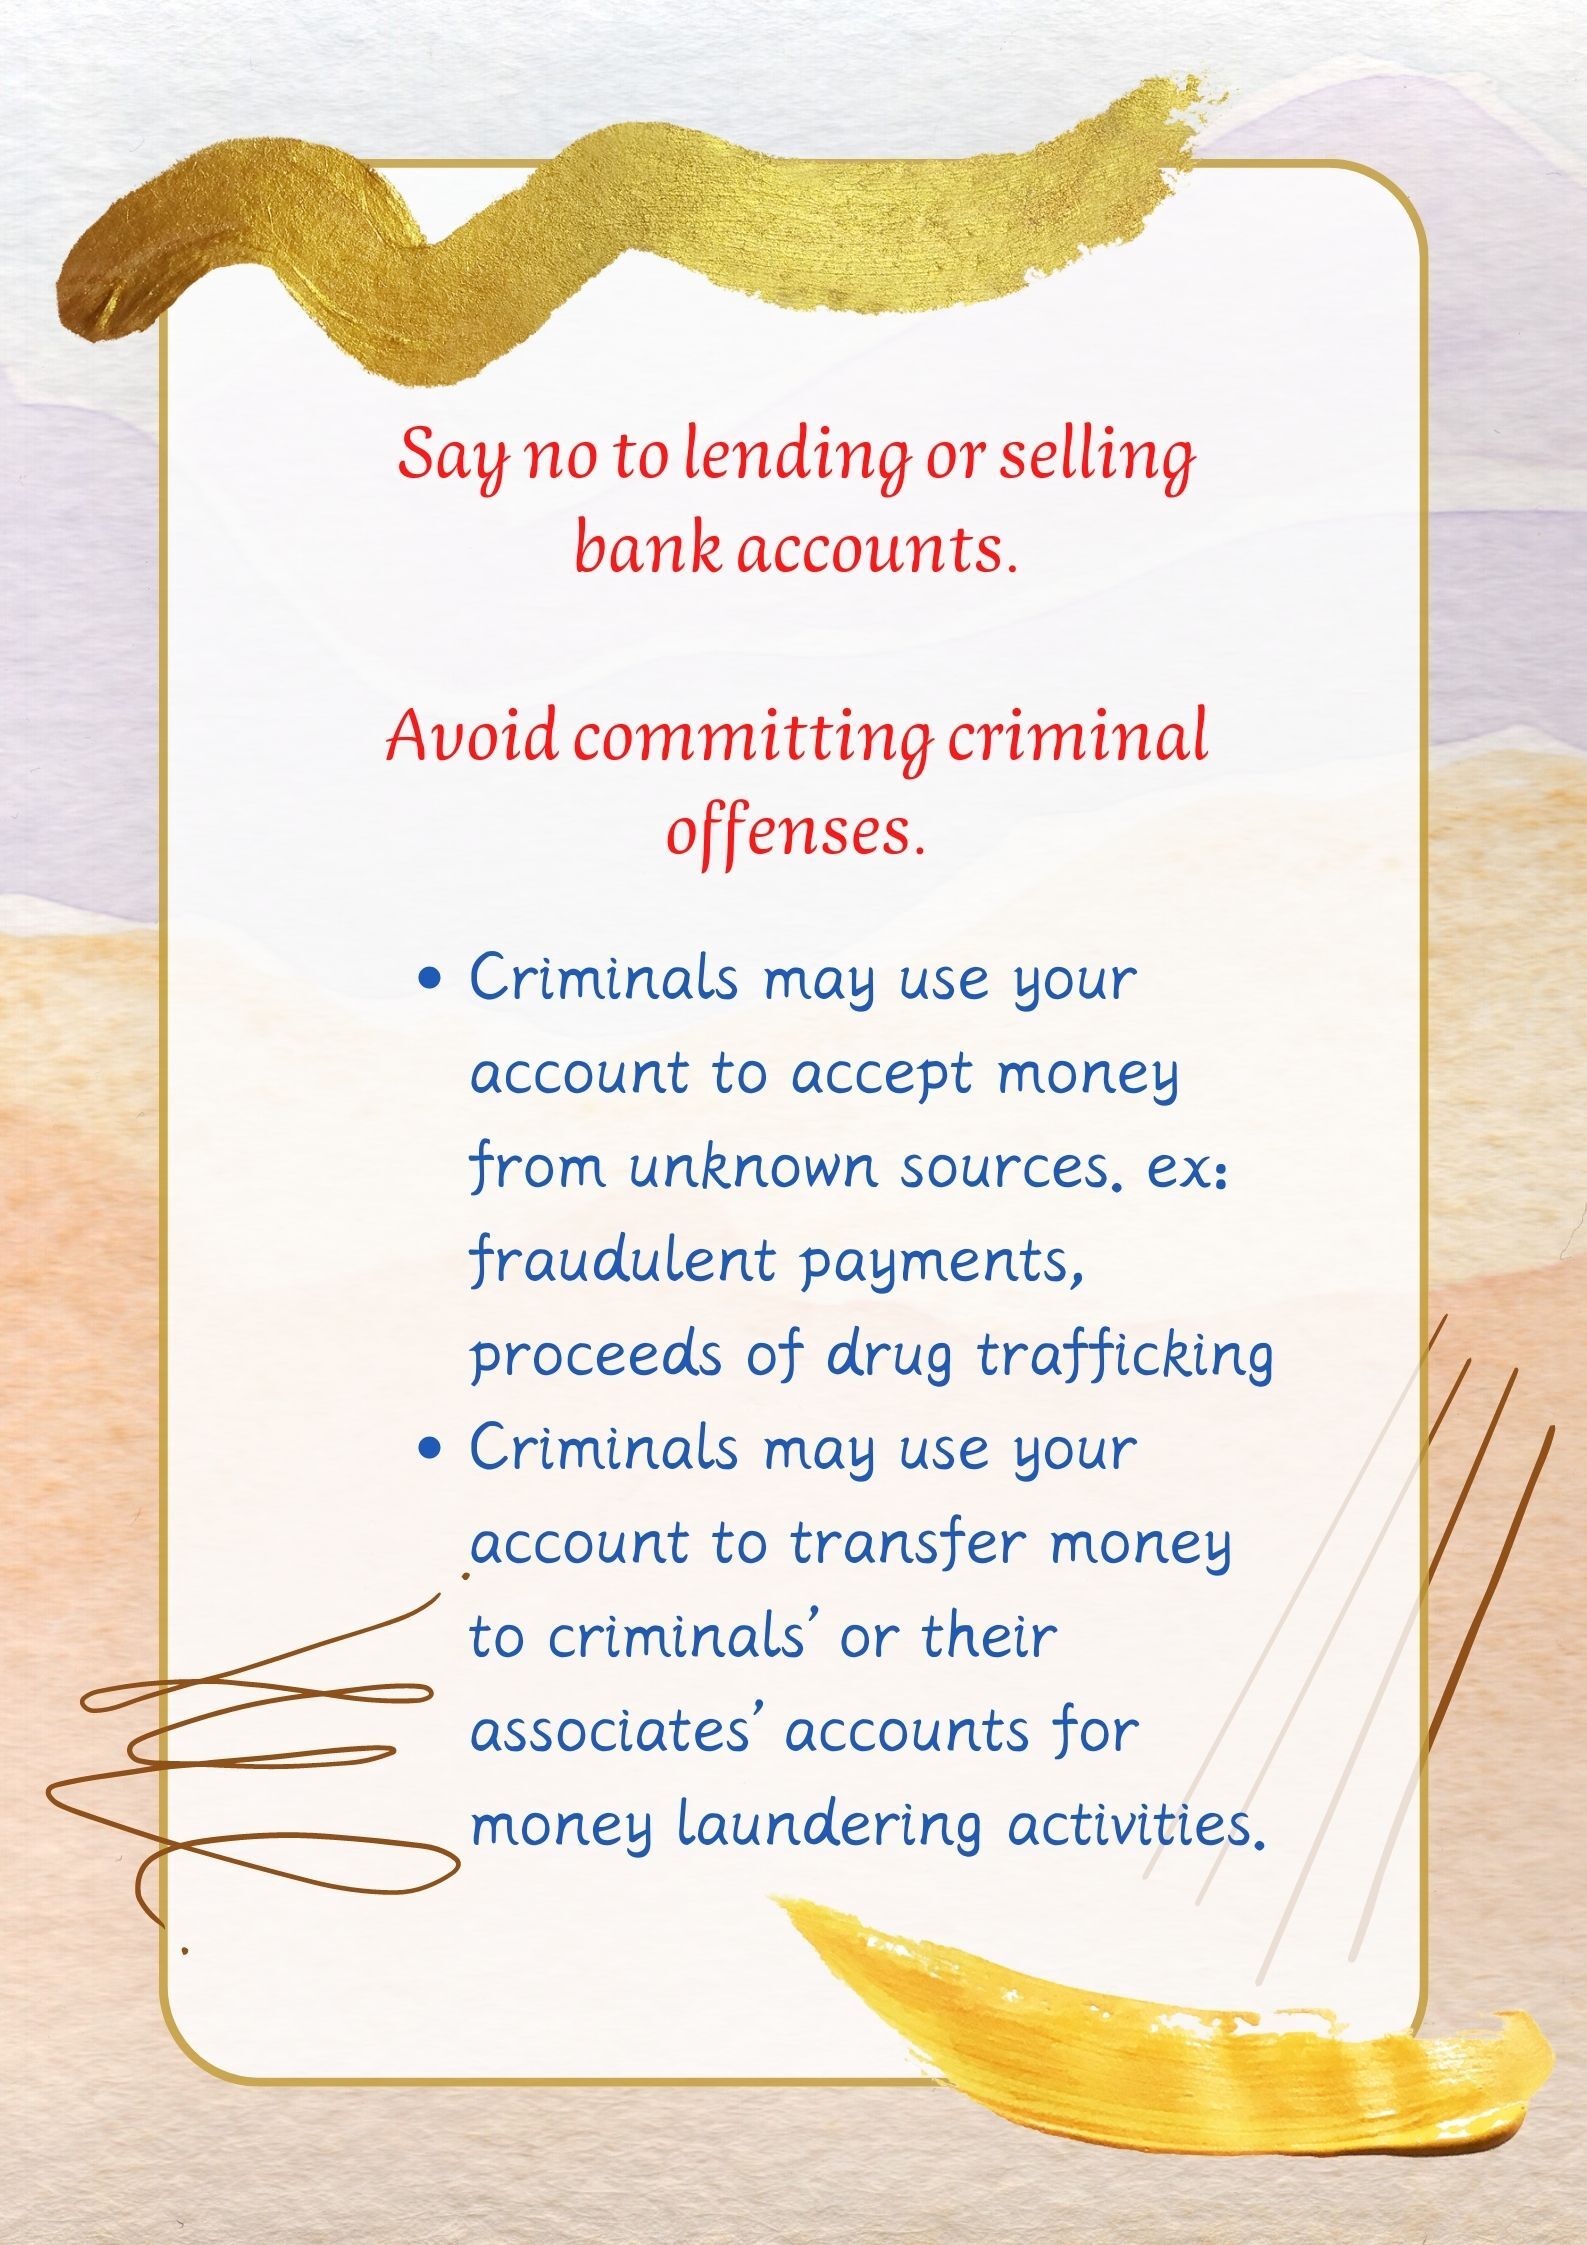 Say no to lending or selling bank accounts.